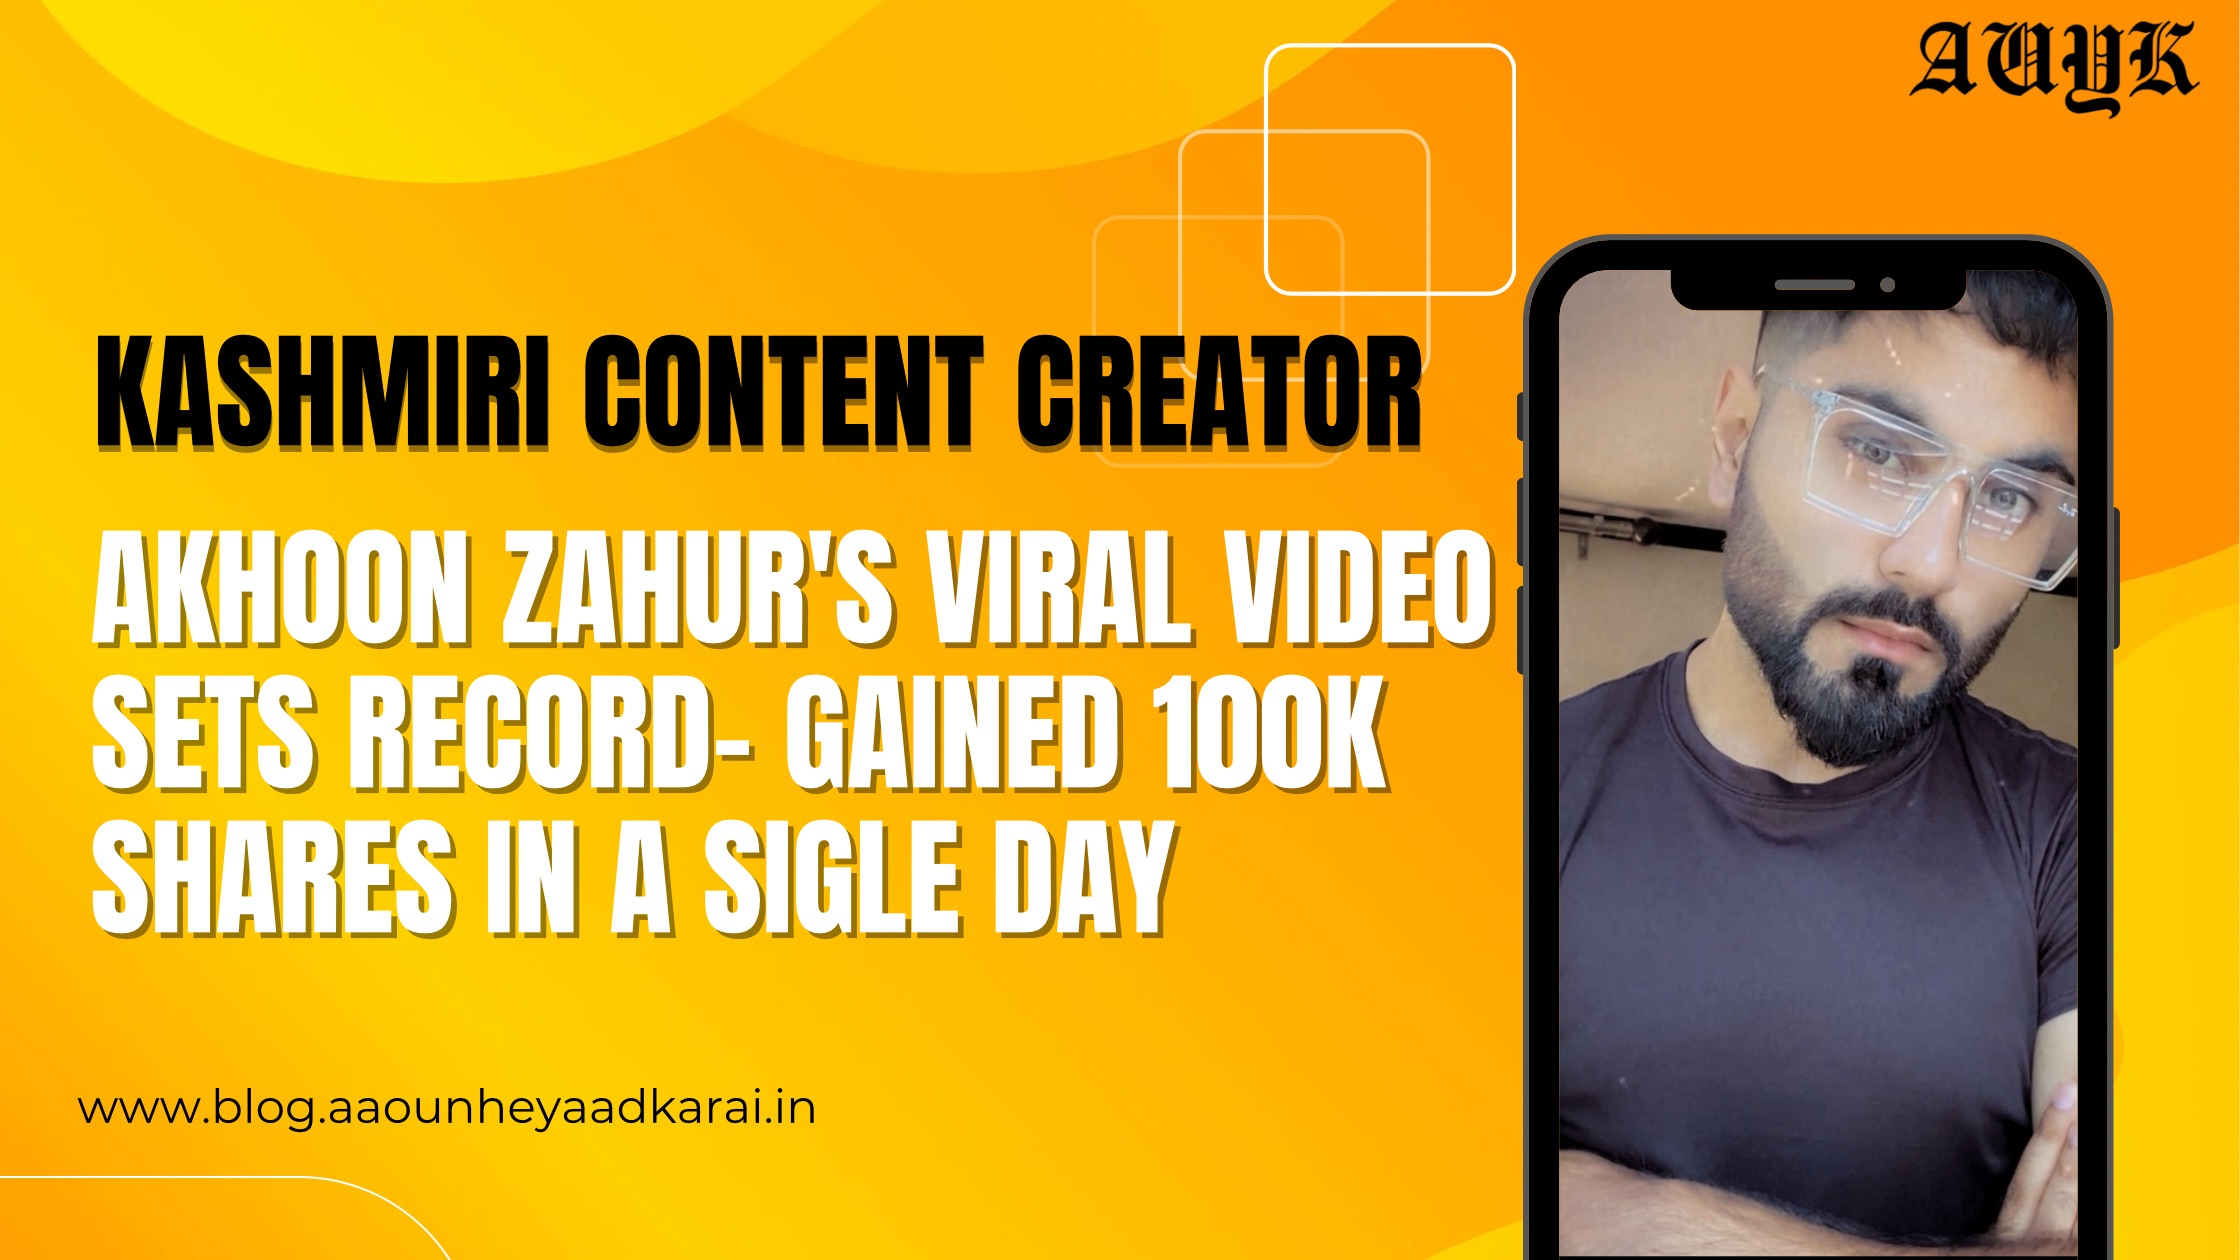 Kashmiri Content Creator Akhoon Zahur's Viral Video sets record- Gained 100k shares in a single day